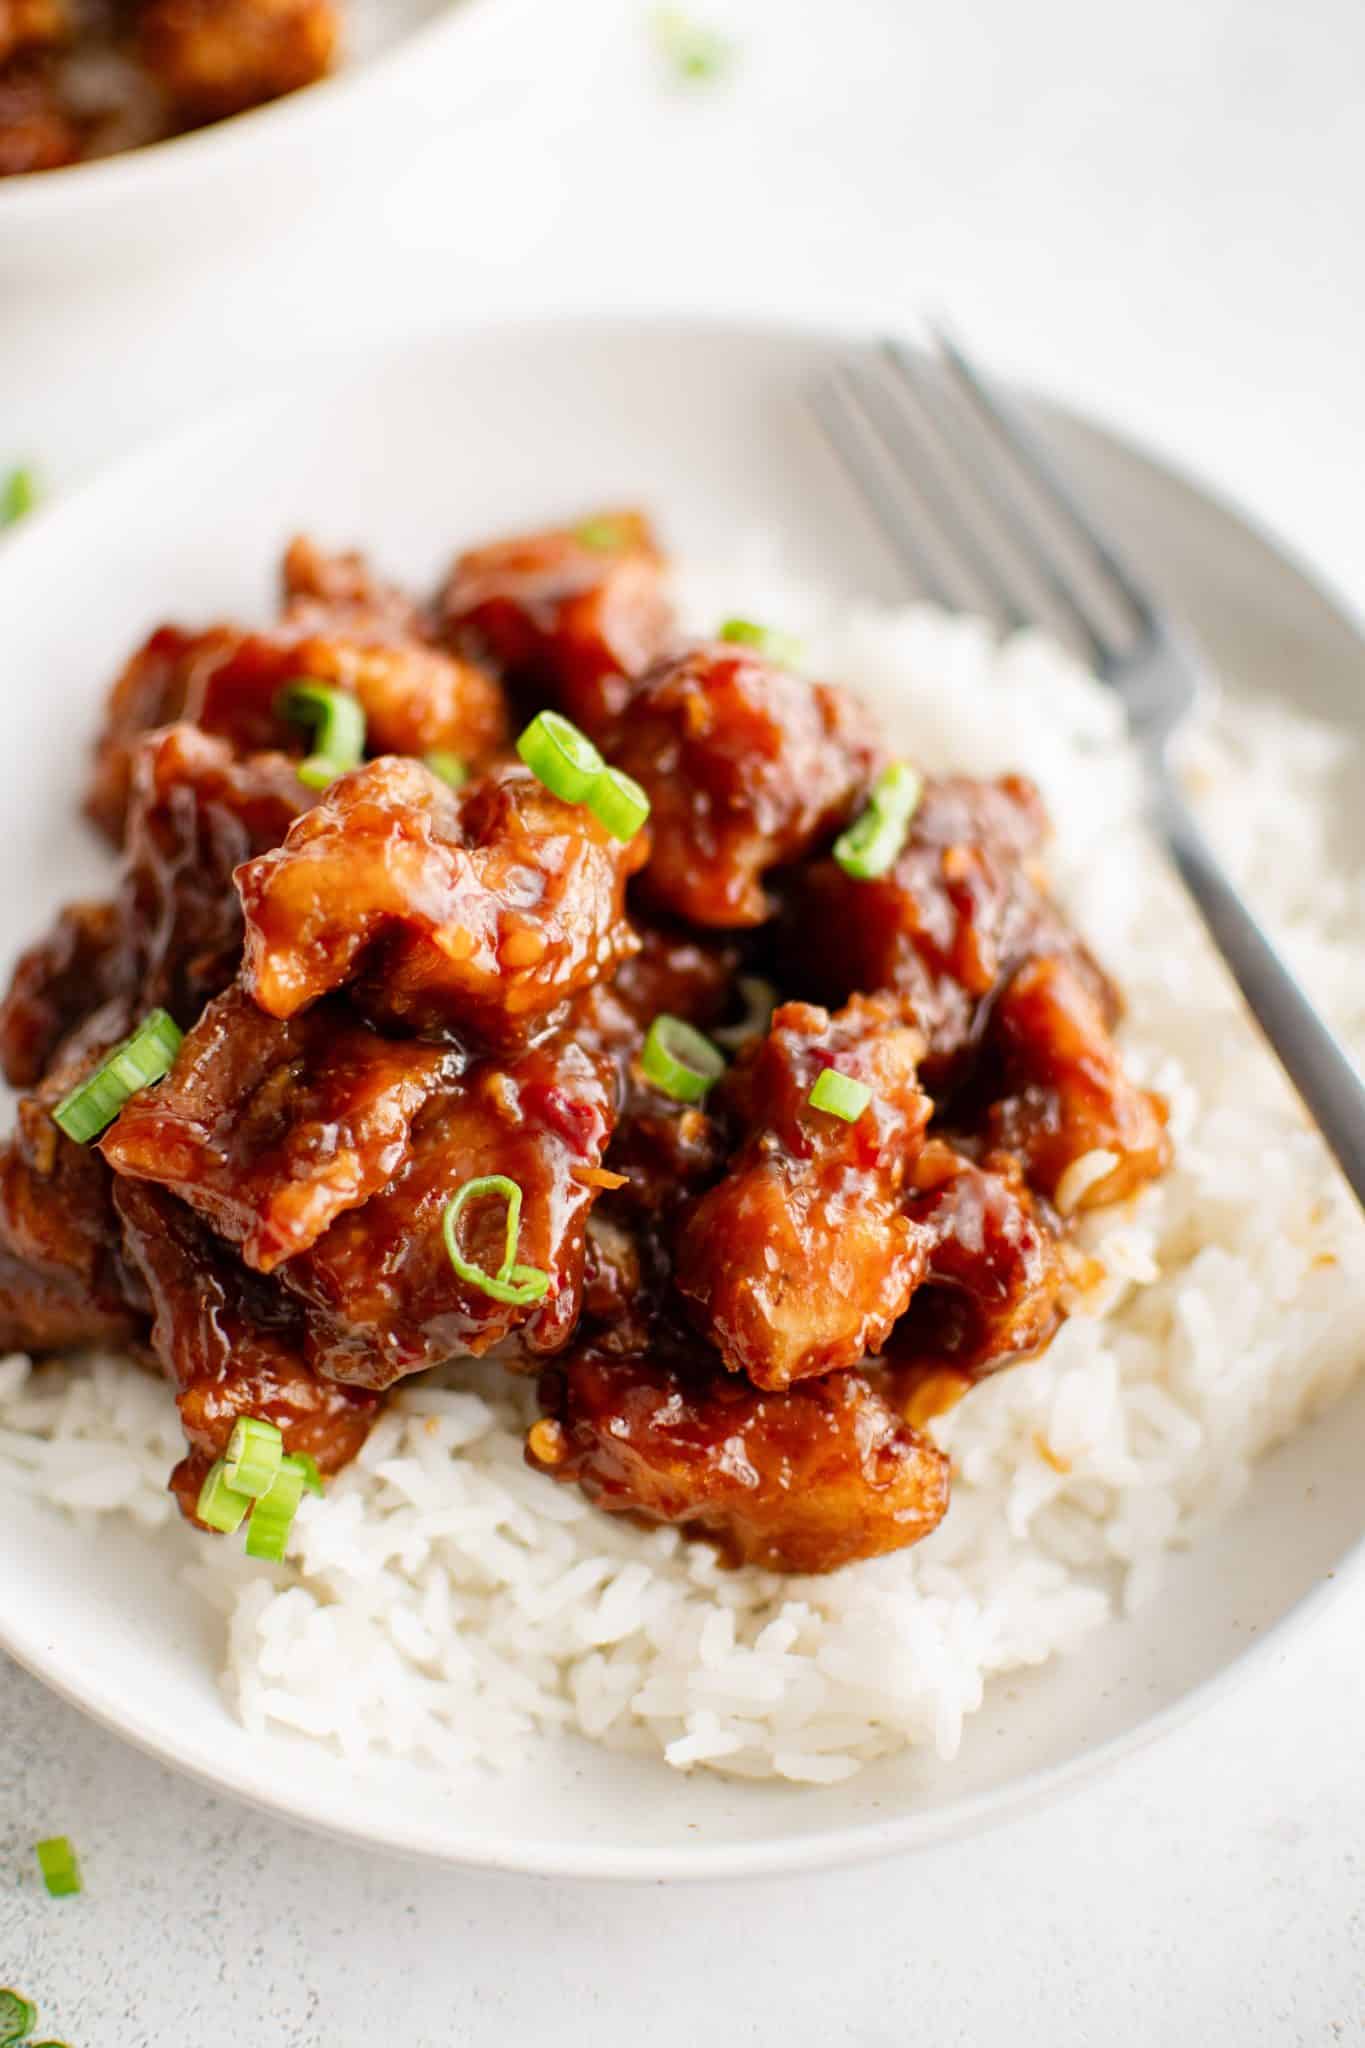 A close-up view of General Tso's Chicken served on a pristine white plate, highlighting the juicy, crispy chicken chunks drenched in a rich, caramelized sauce, accompanied by a side of steamed white rice, the dish garnished with delicate green onion slivers.